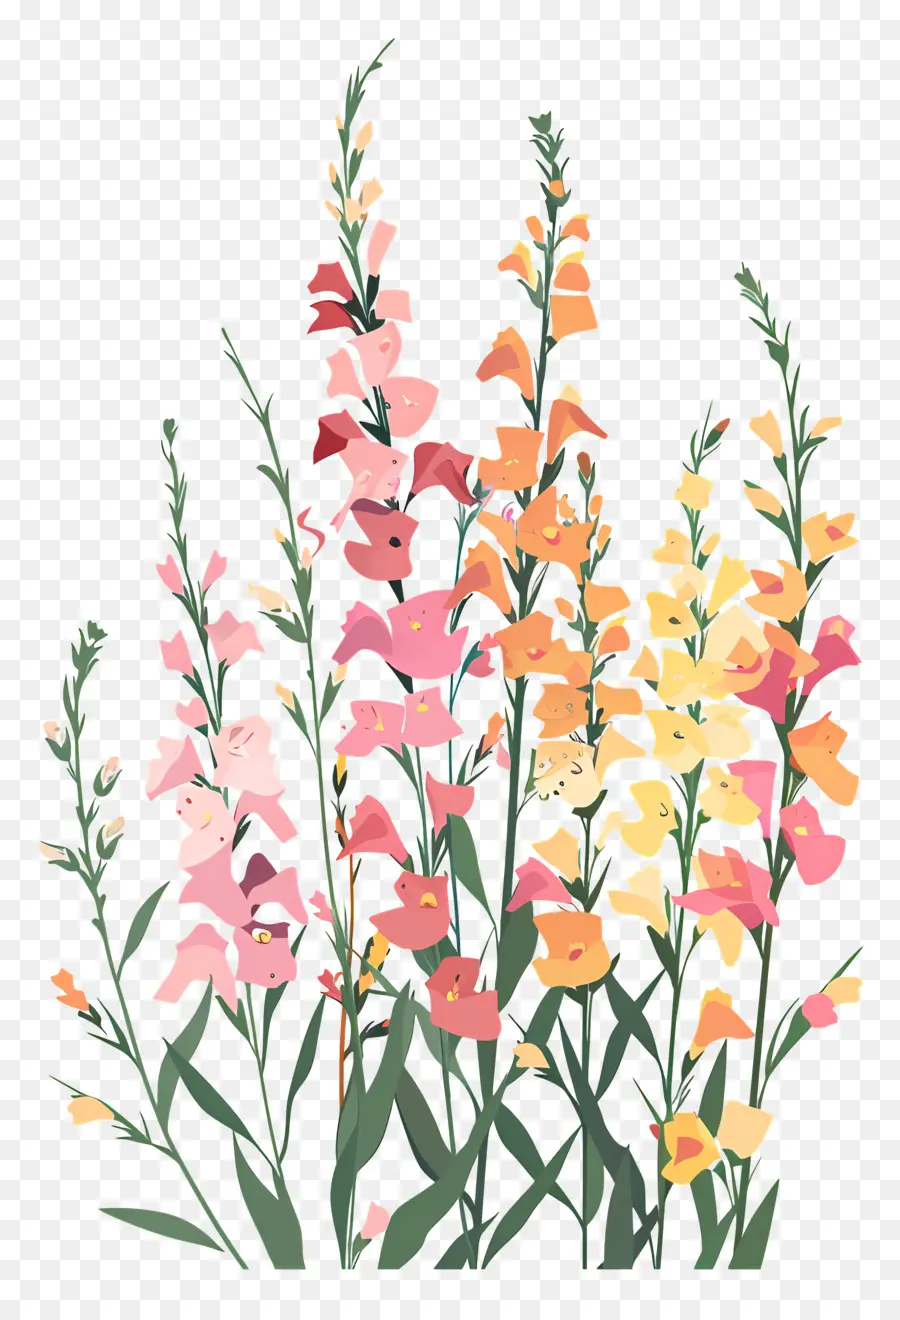 Mufliers，Fleurs Sauvages PNG